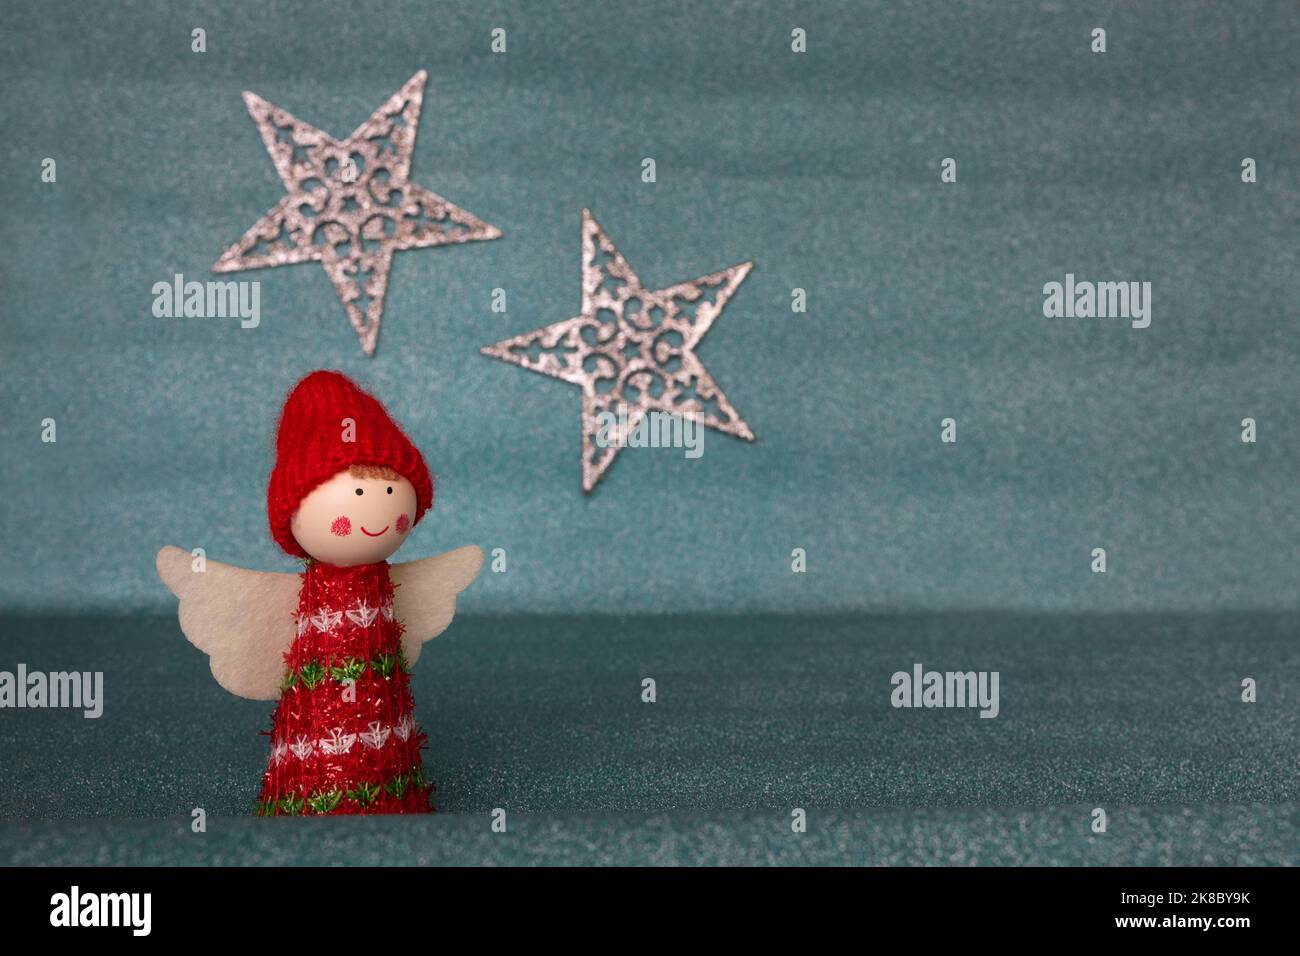 A cute Christmas angel figurine with white wings wearing a red hat and clothes isolated against a glittering pastel blue background with a star Stock Photo